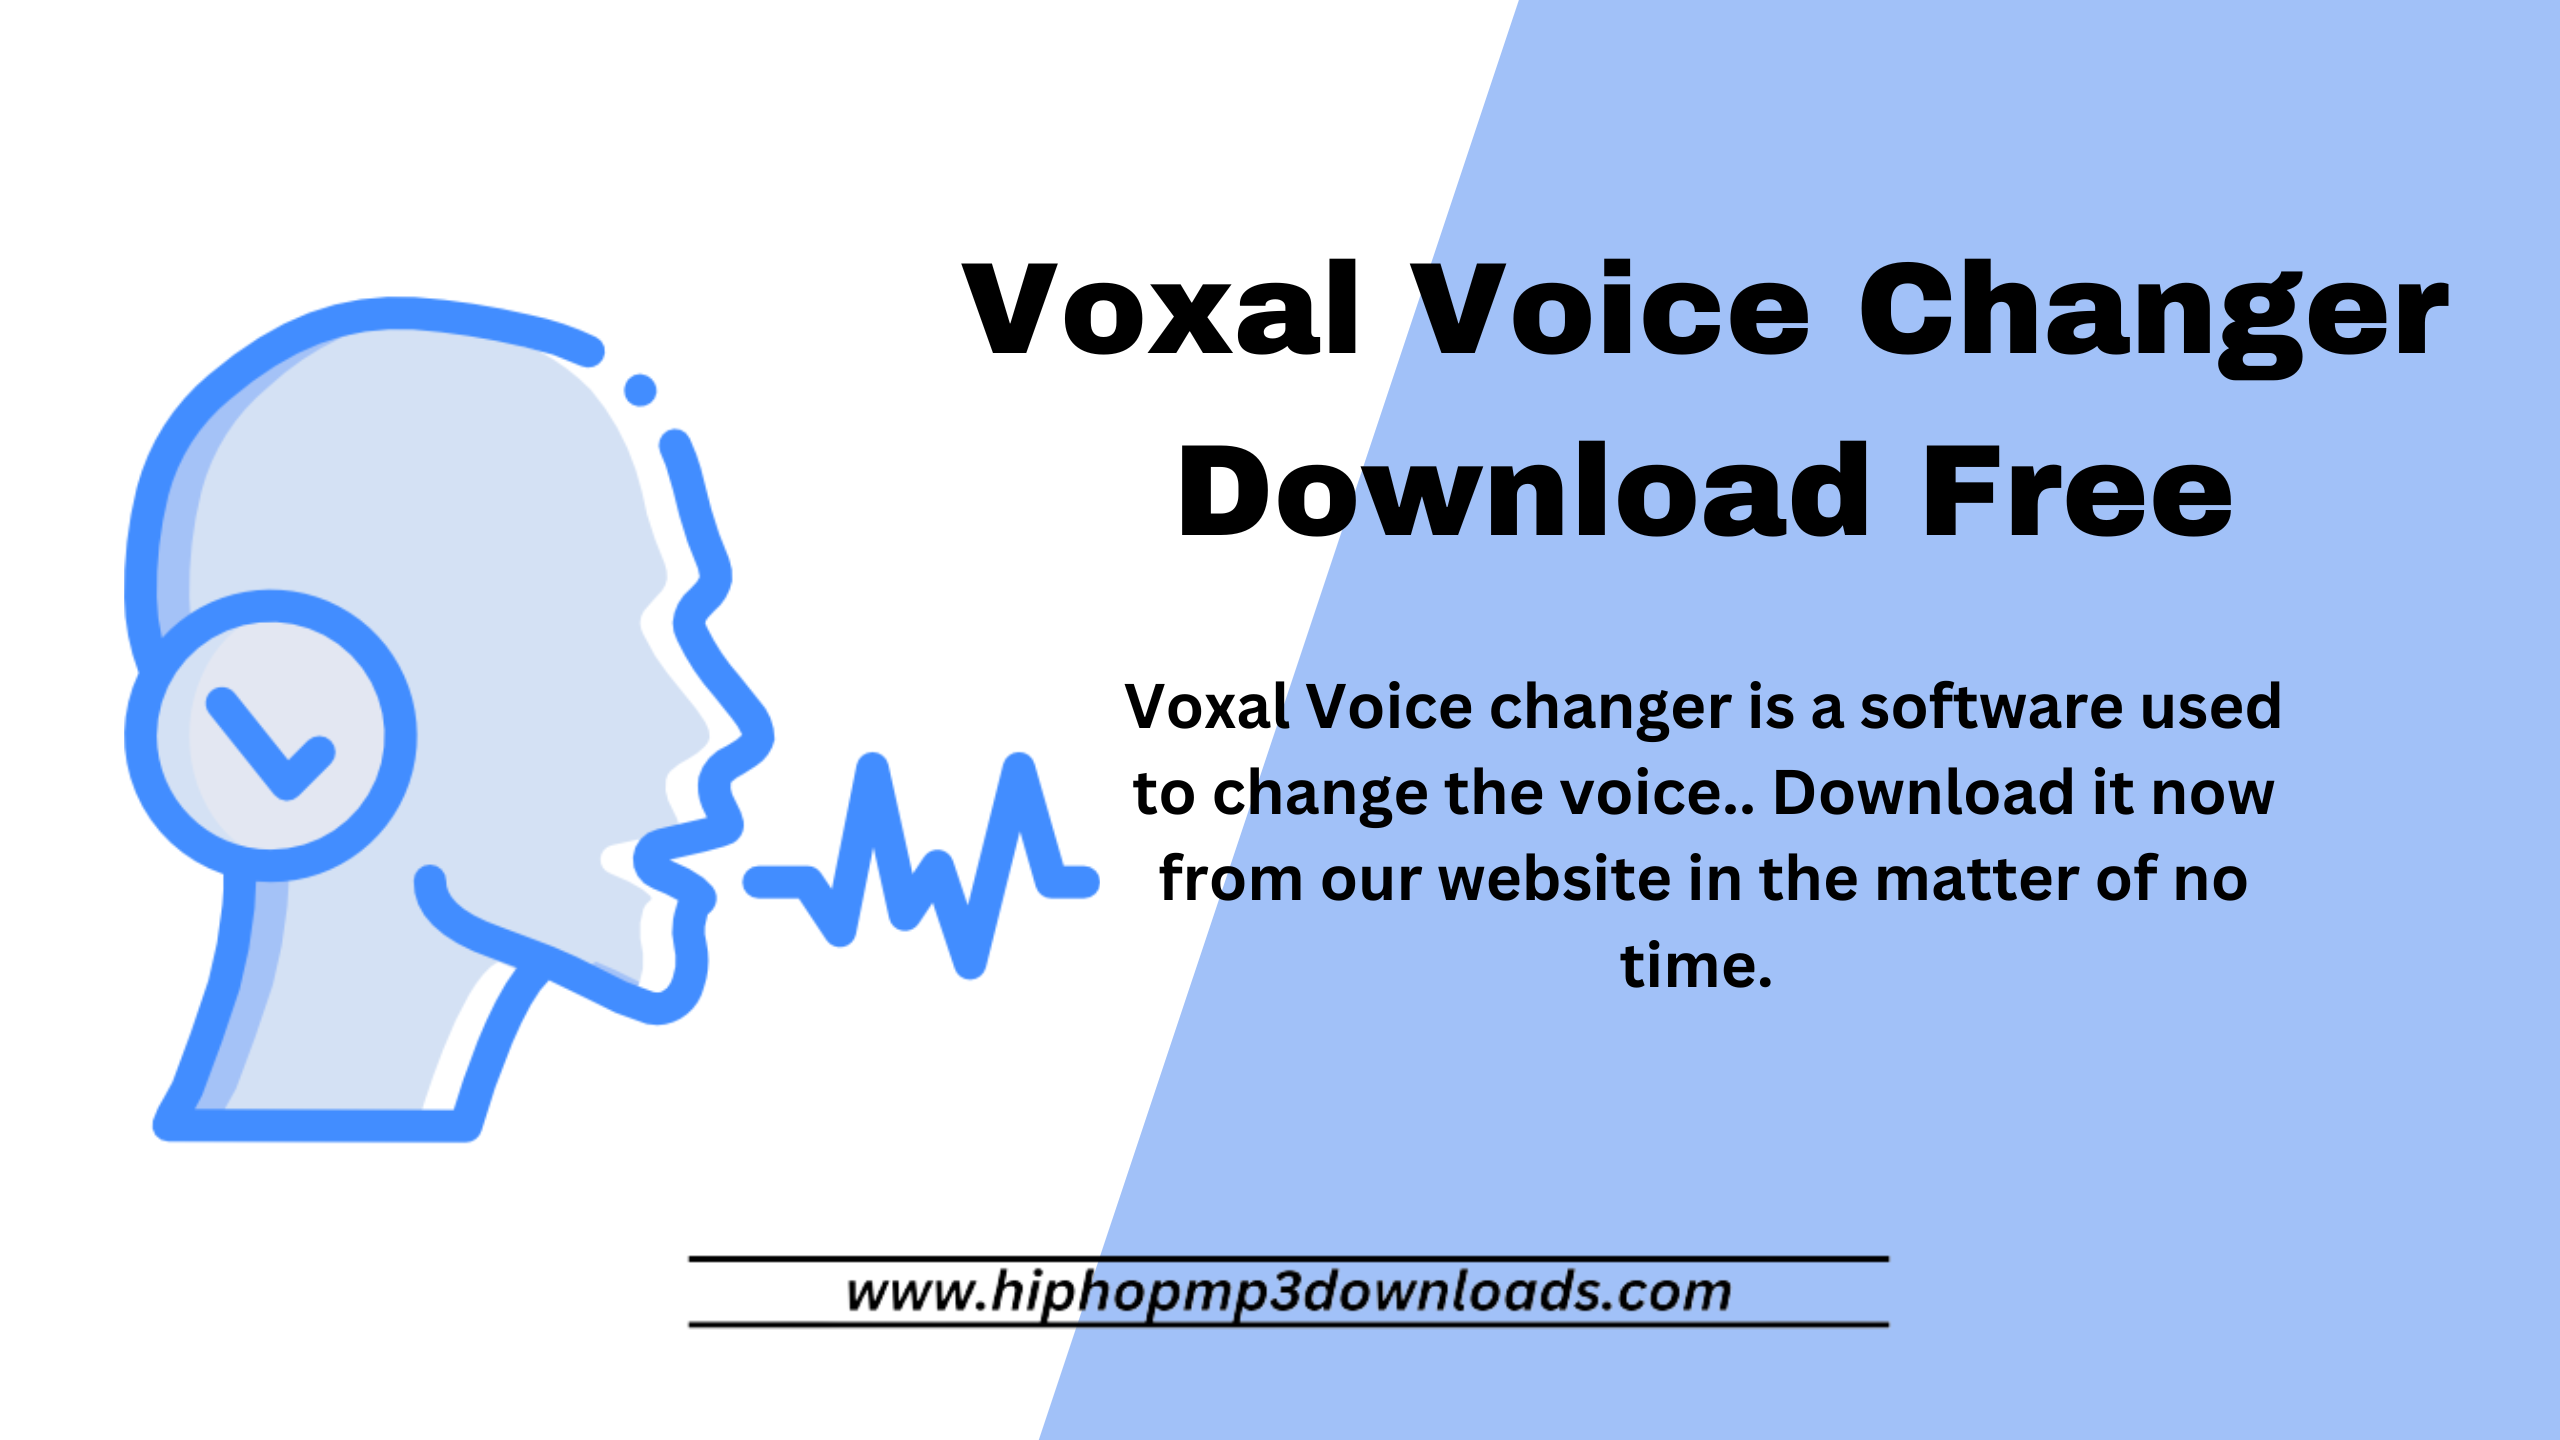 Voxal Voice Changer Download Free